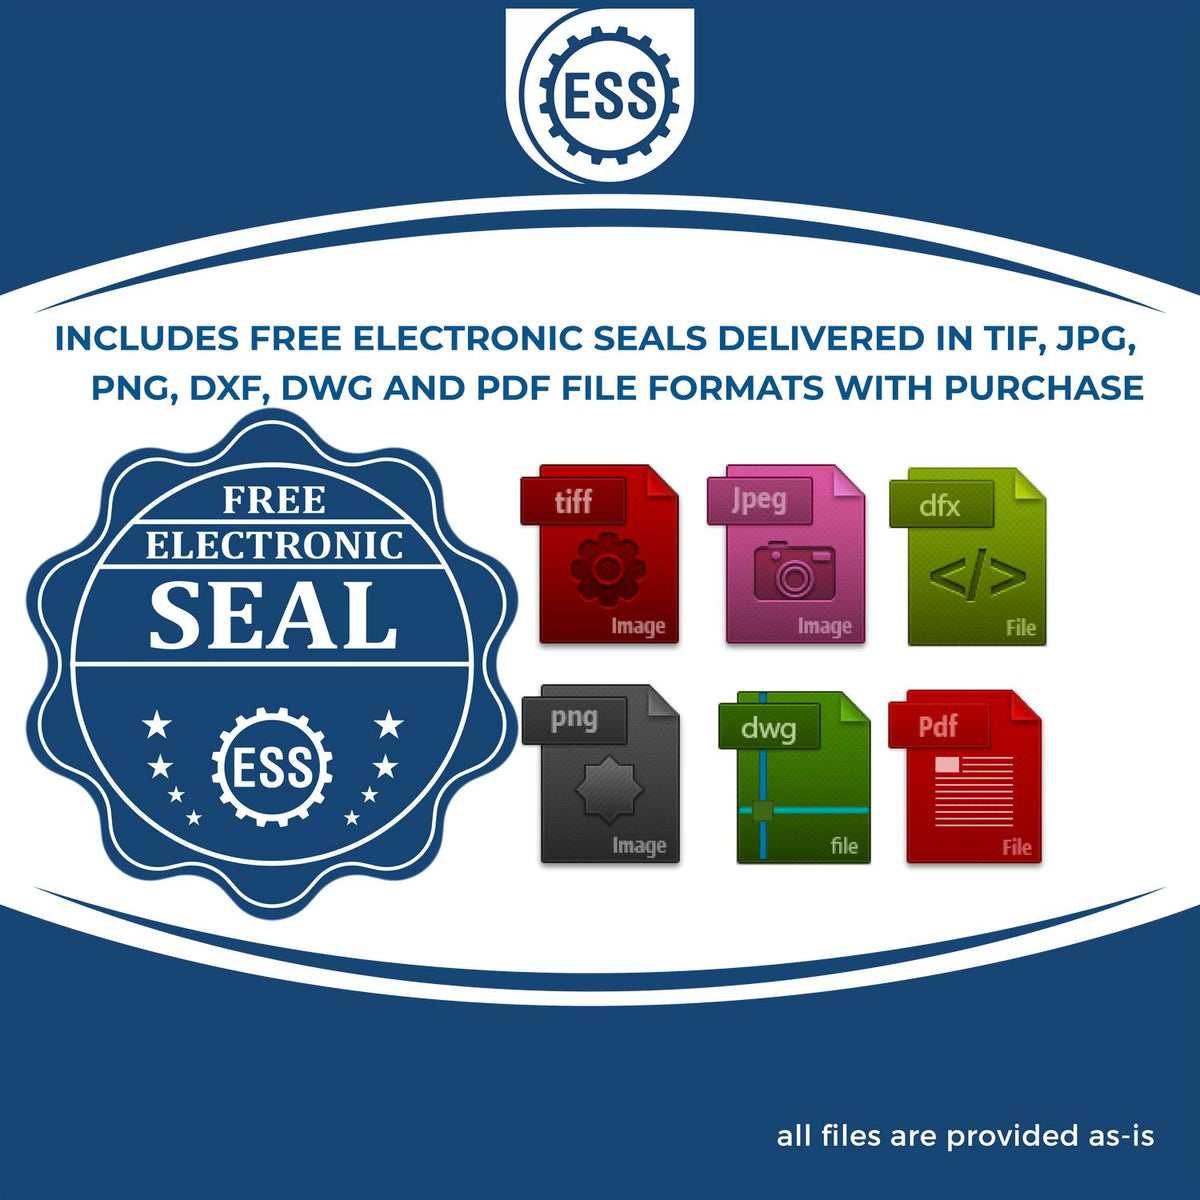 An infographic for the free electronic seal for the Nevada Professional Geologist Seal Stamp illustrating the different file type icons such as DXF, DWG, TIF, JPG and PNG.